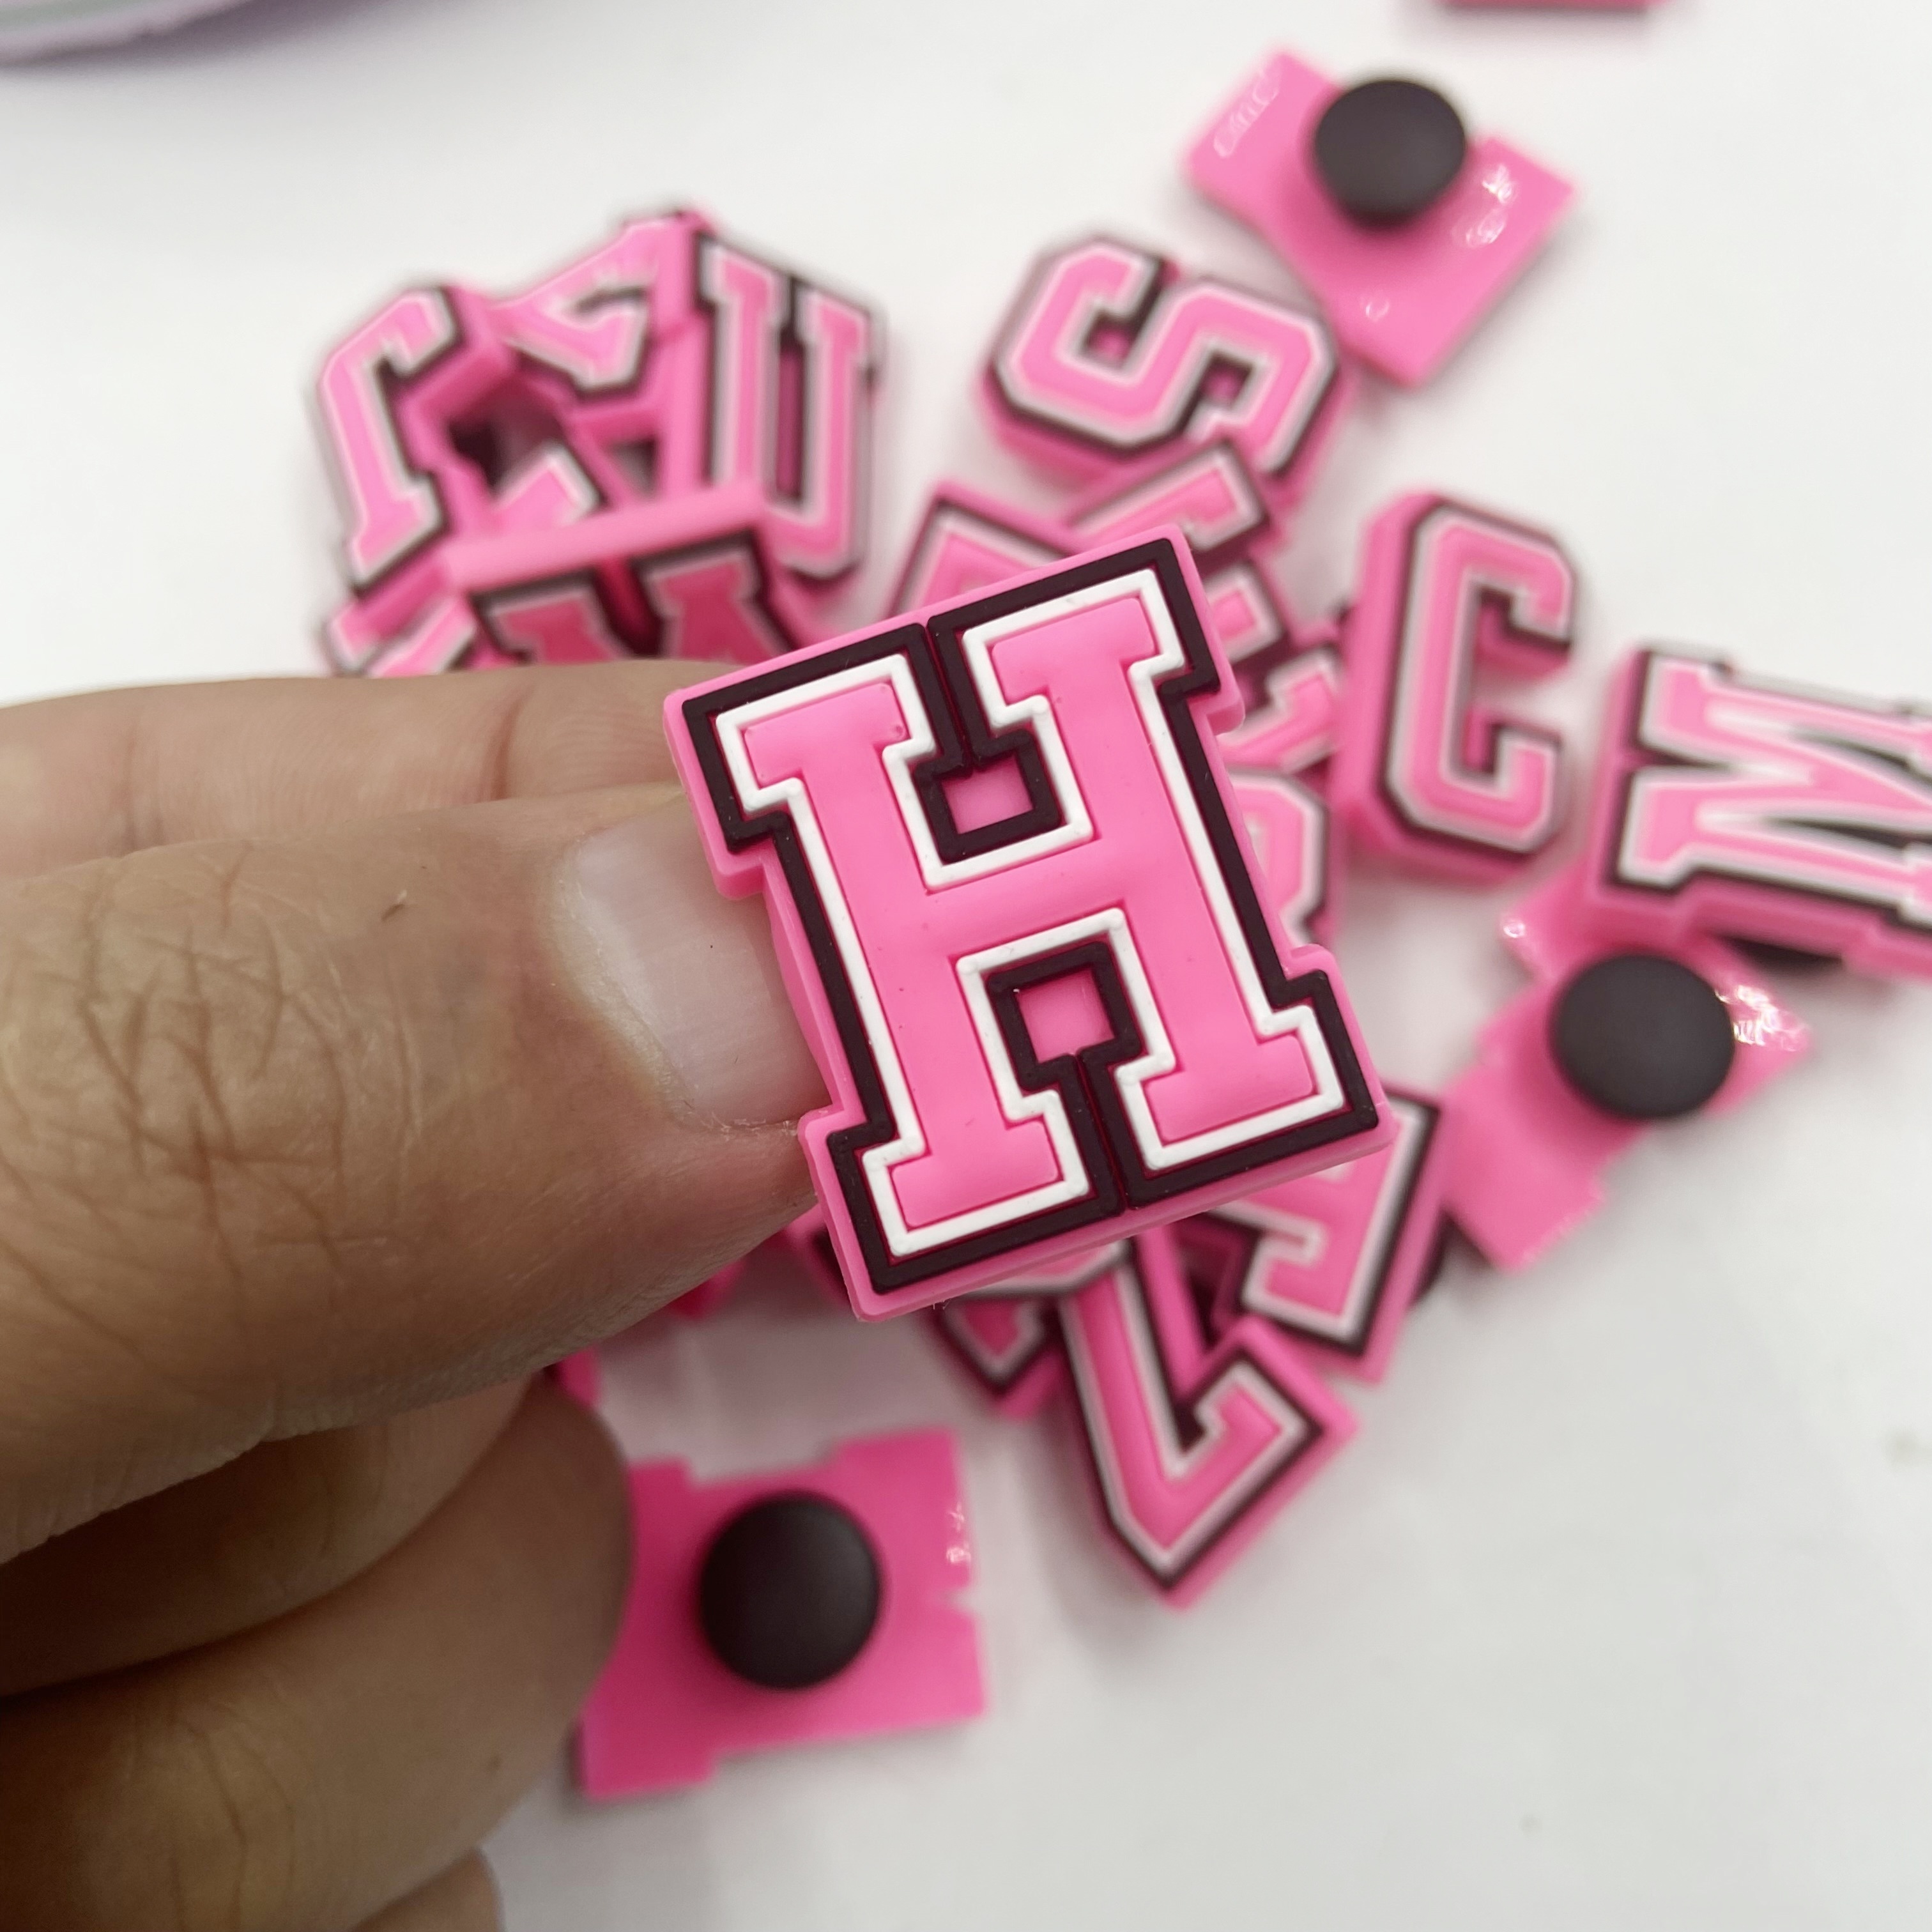 Pink Letter Croc Charms